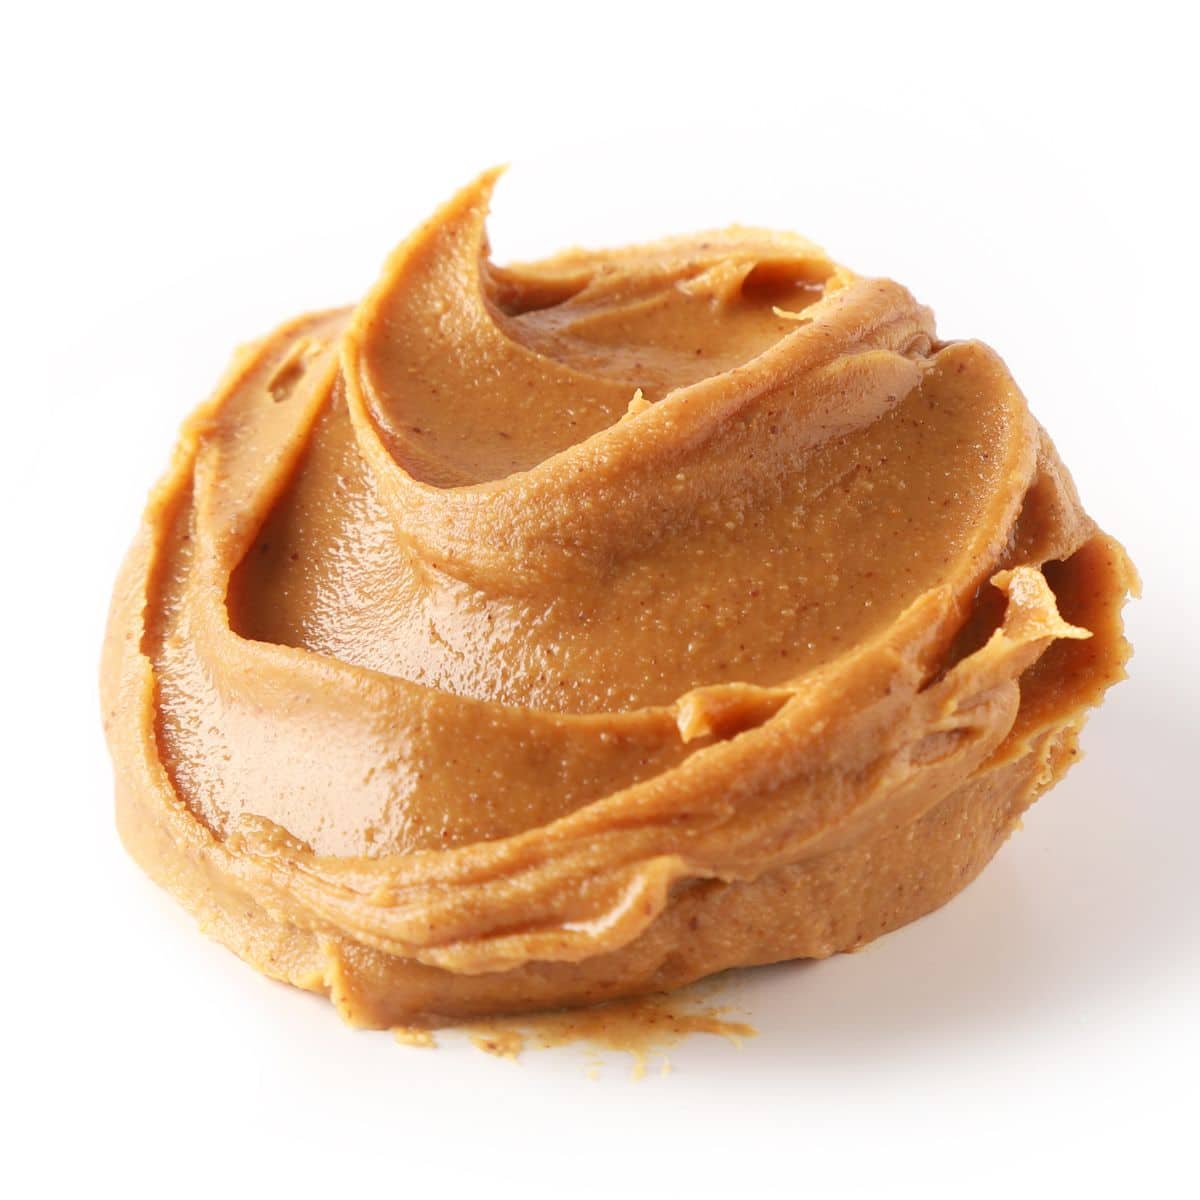 Peanut butter on a white background.